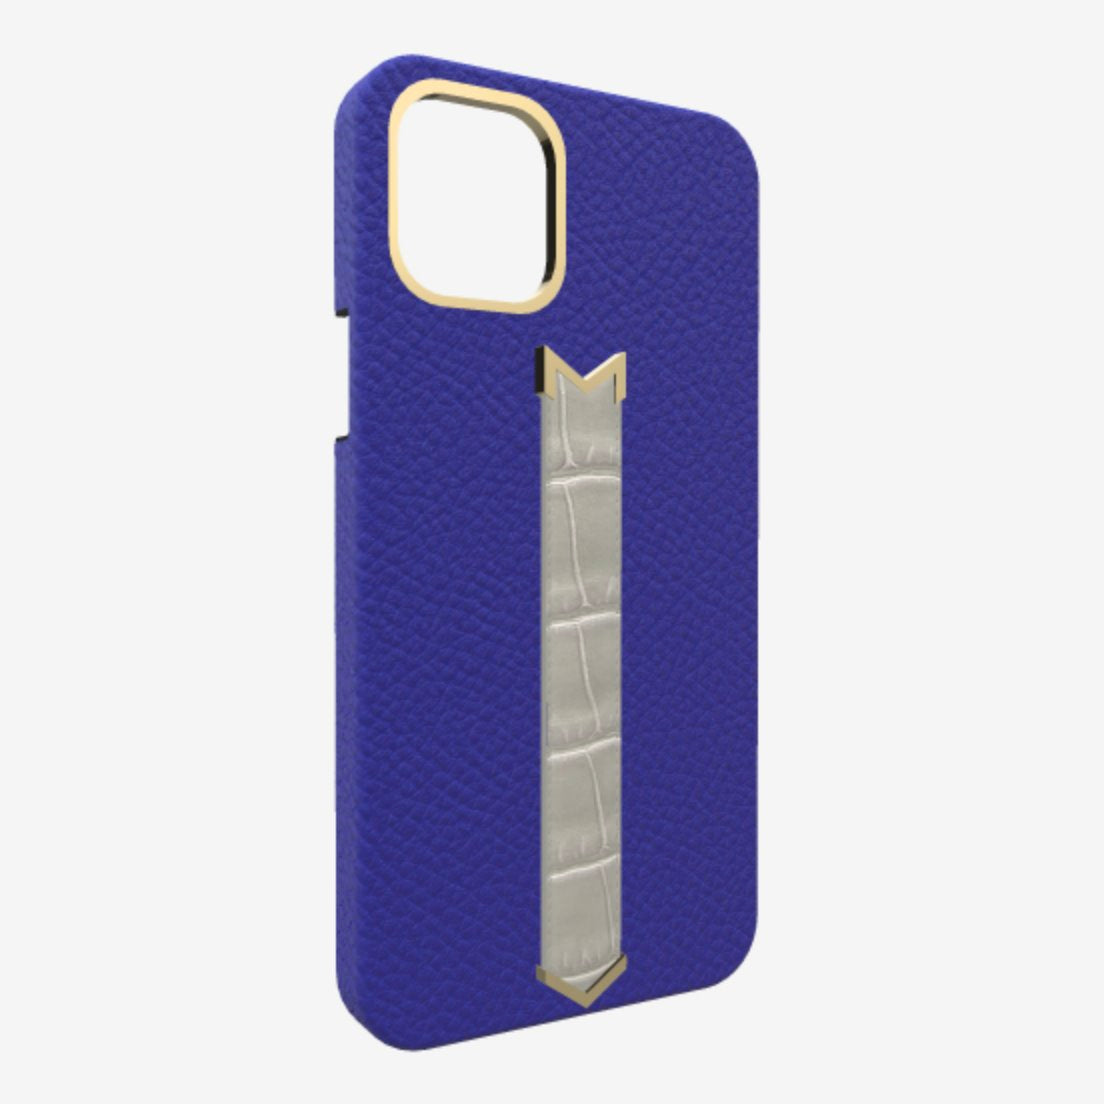 Gold Finger Strap Case for iPhone 13 Pro Max in Genuine Calfskin and Alligator Electric Blue Pearl Grey 